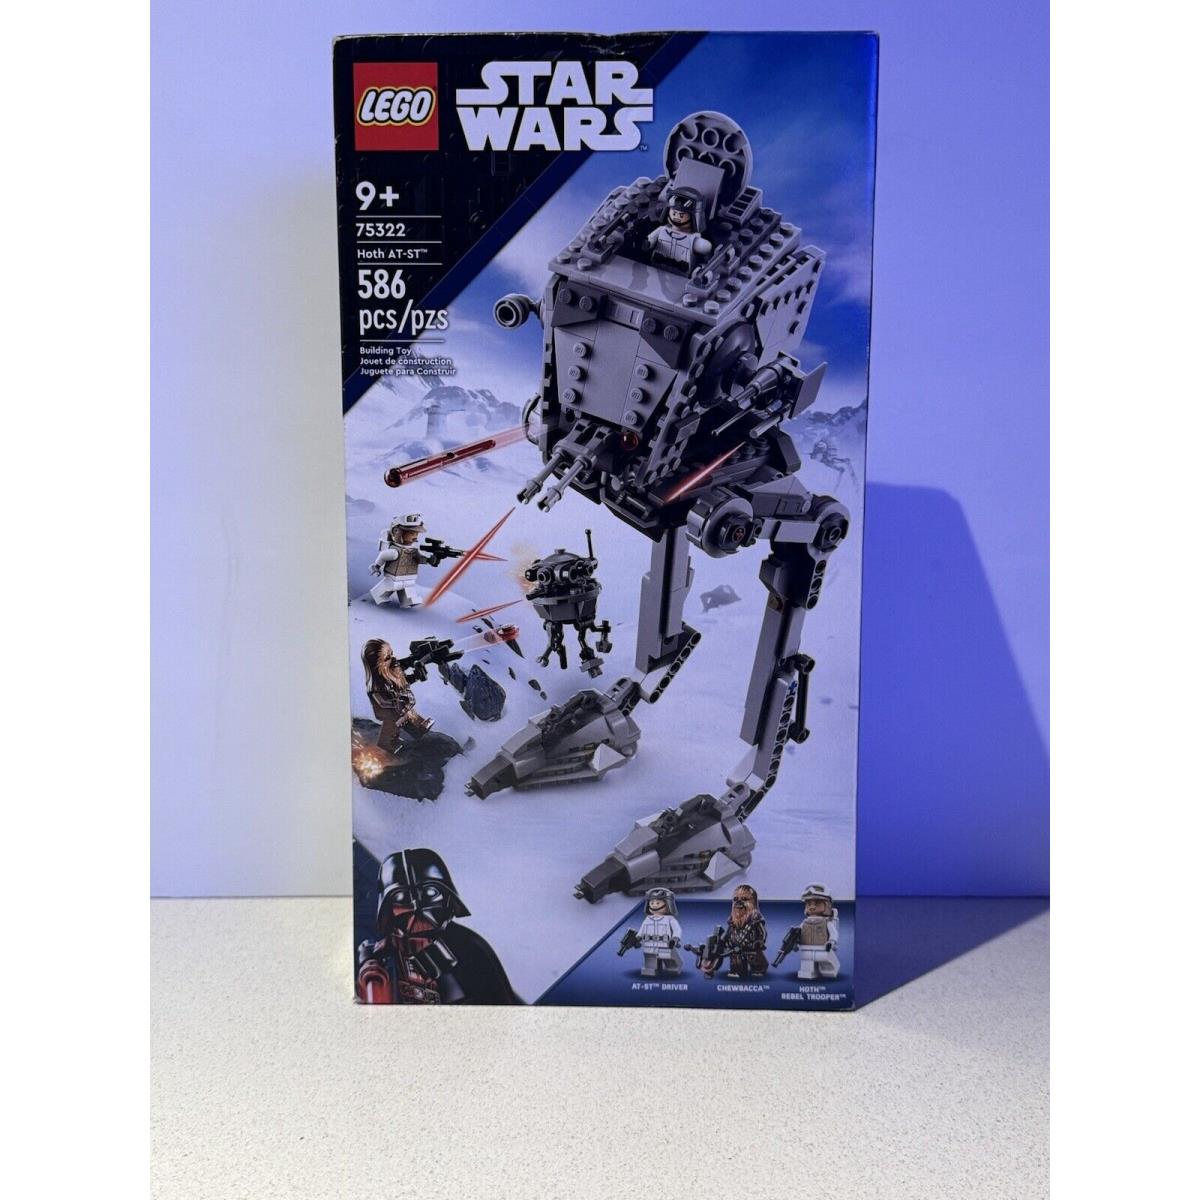 Lego Star Wars: Hoth At-st 75322 Walker Chewbacca and Droid Minifigure